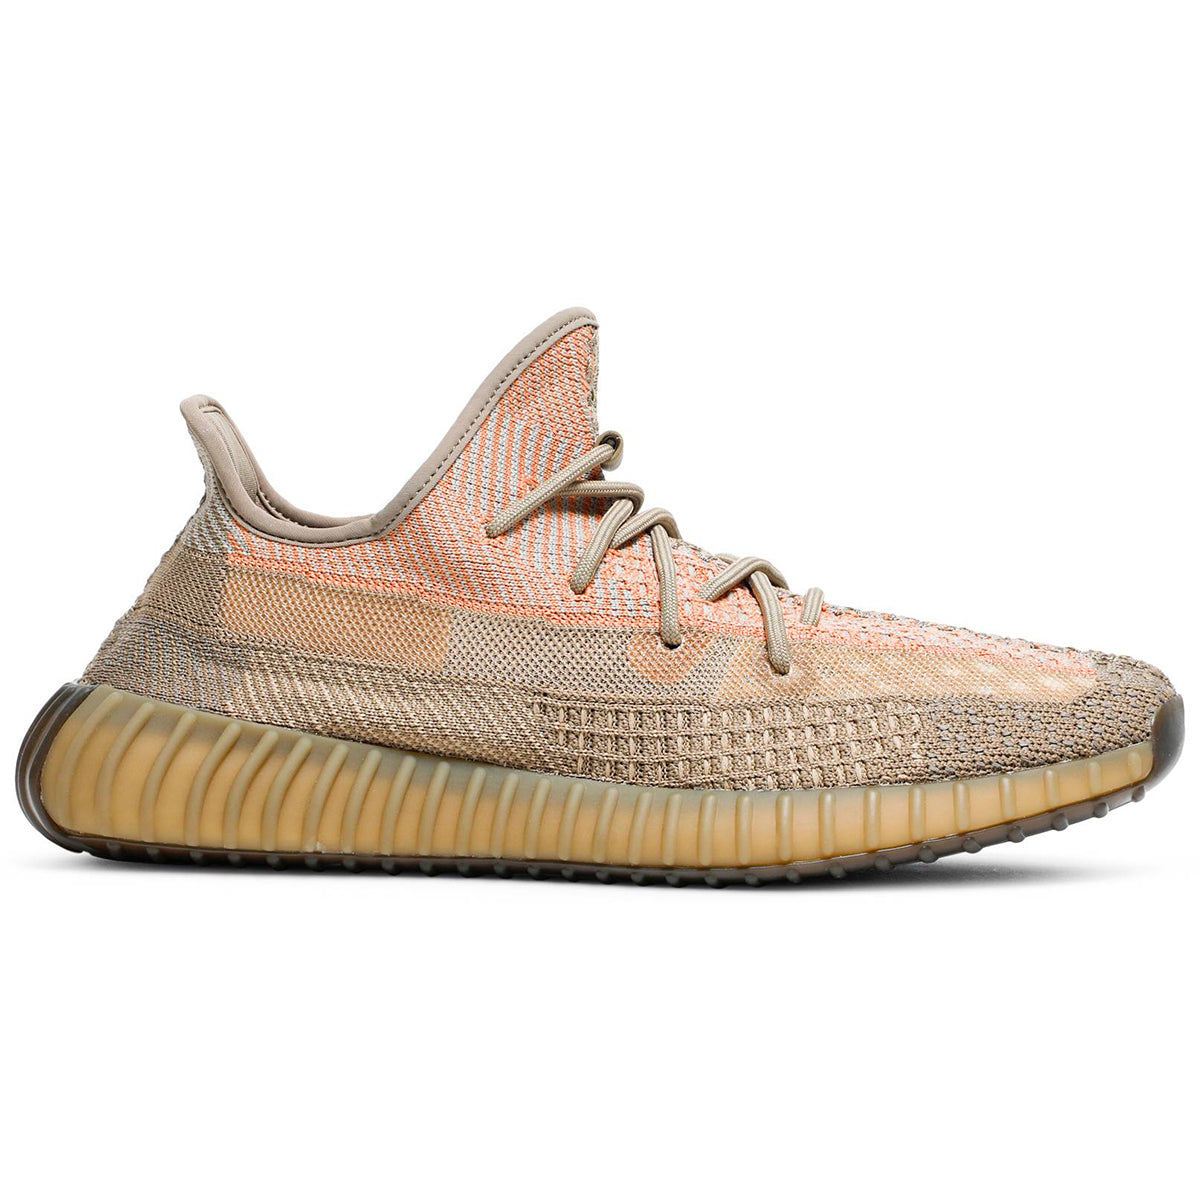 adidas Yeezy Boost 350 V2 'Sand Taupe'